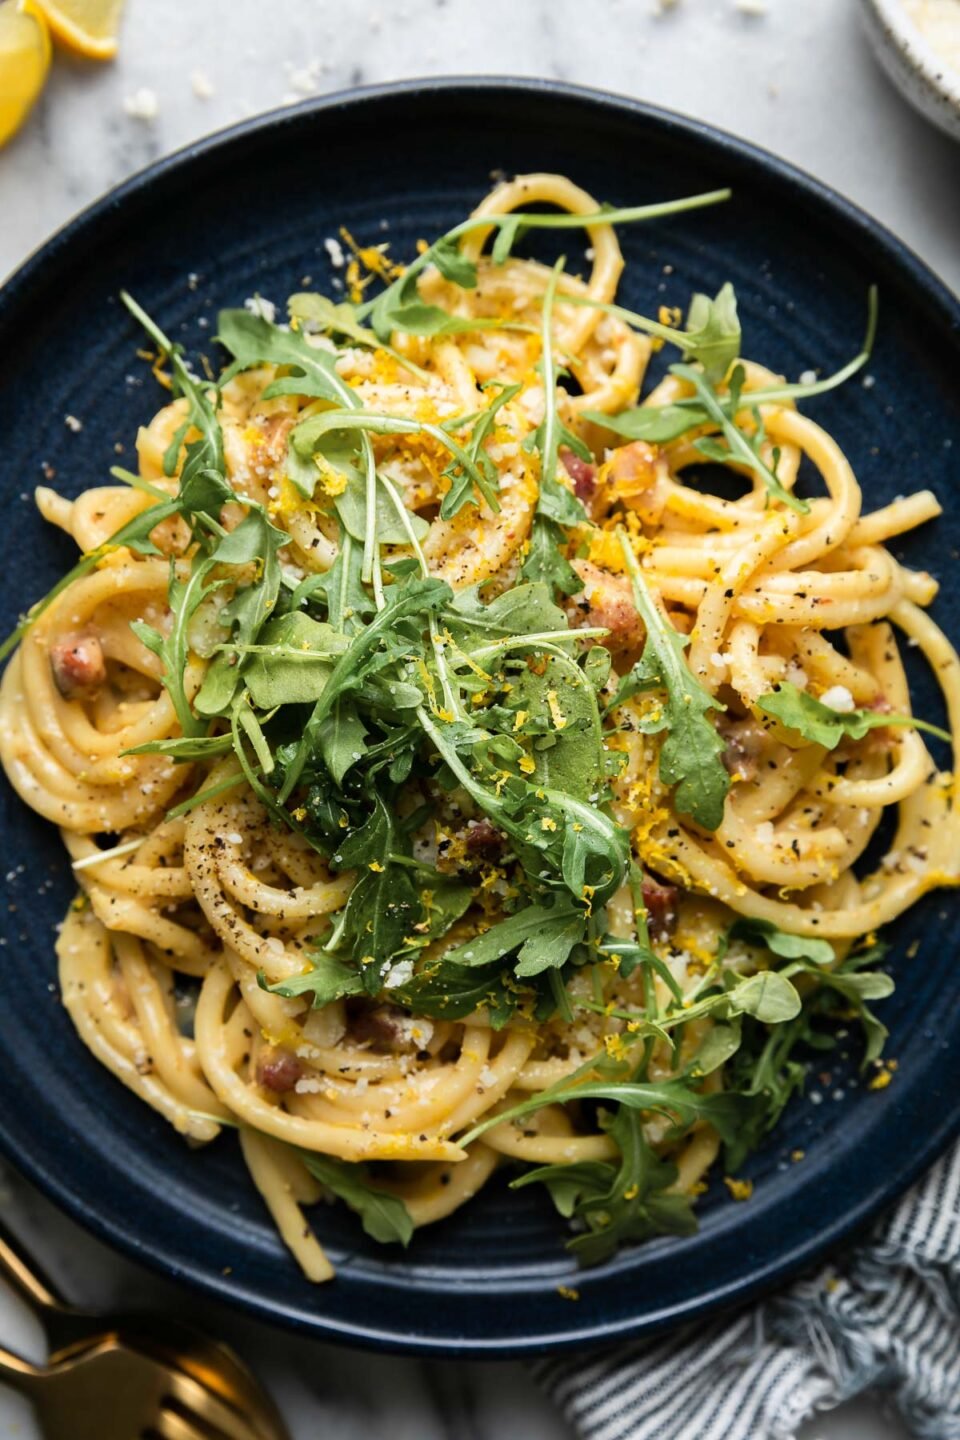 A dark blue ceramic plate topped with bucatini carbonara garnished with ground black pepper, fresh lemon zest, arugula, and freshly grated parmesan cheese sits atop a gray and white marble surface. The plate rests atop a blue and white striped linen napkin with a gold spoon and fork resting alongside. Fresh lemon wedges as well as loose grated parmesan and a small speckled ceramic bowl filled with fresh grated parmesan rest on the surface near the plate.